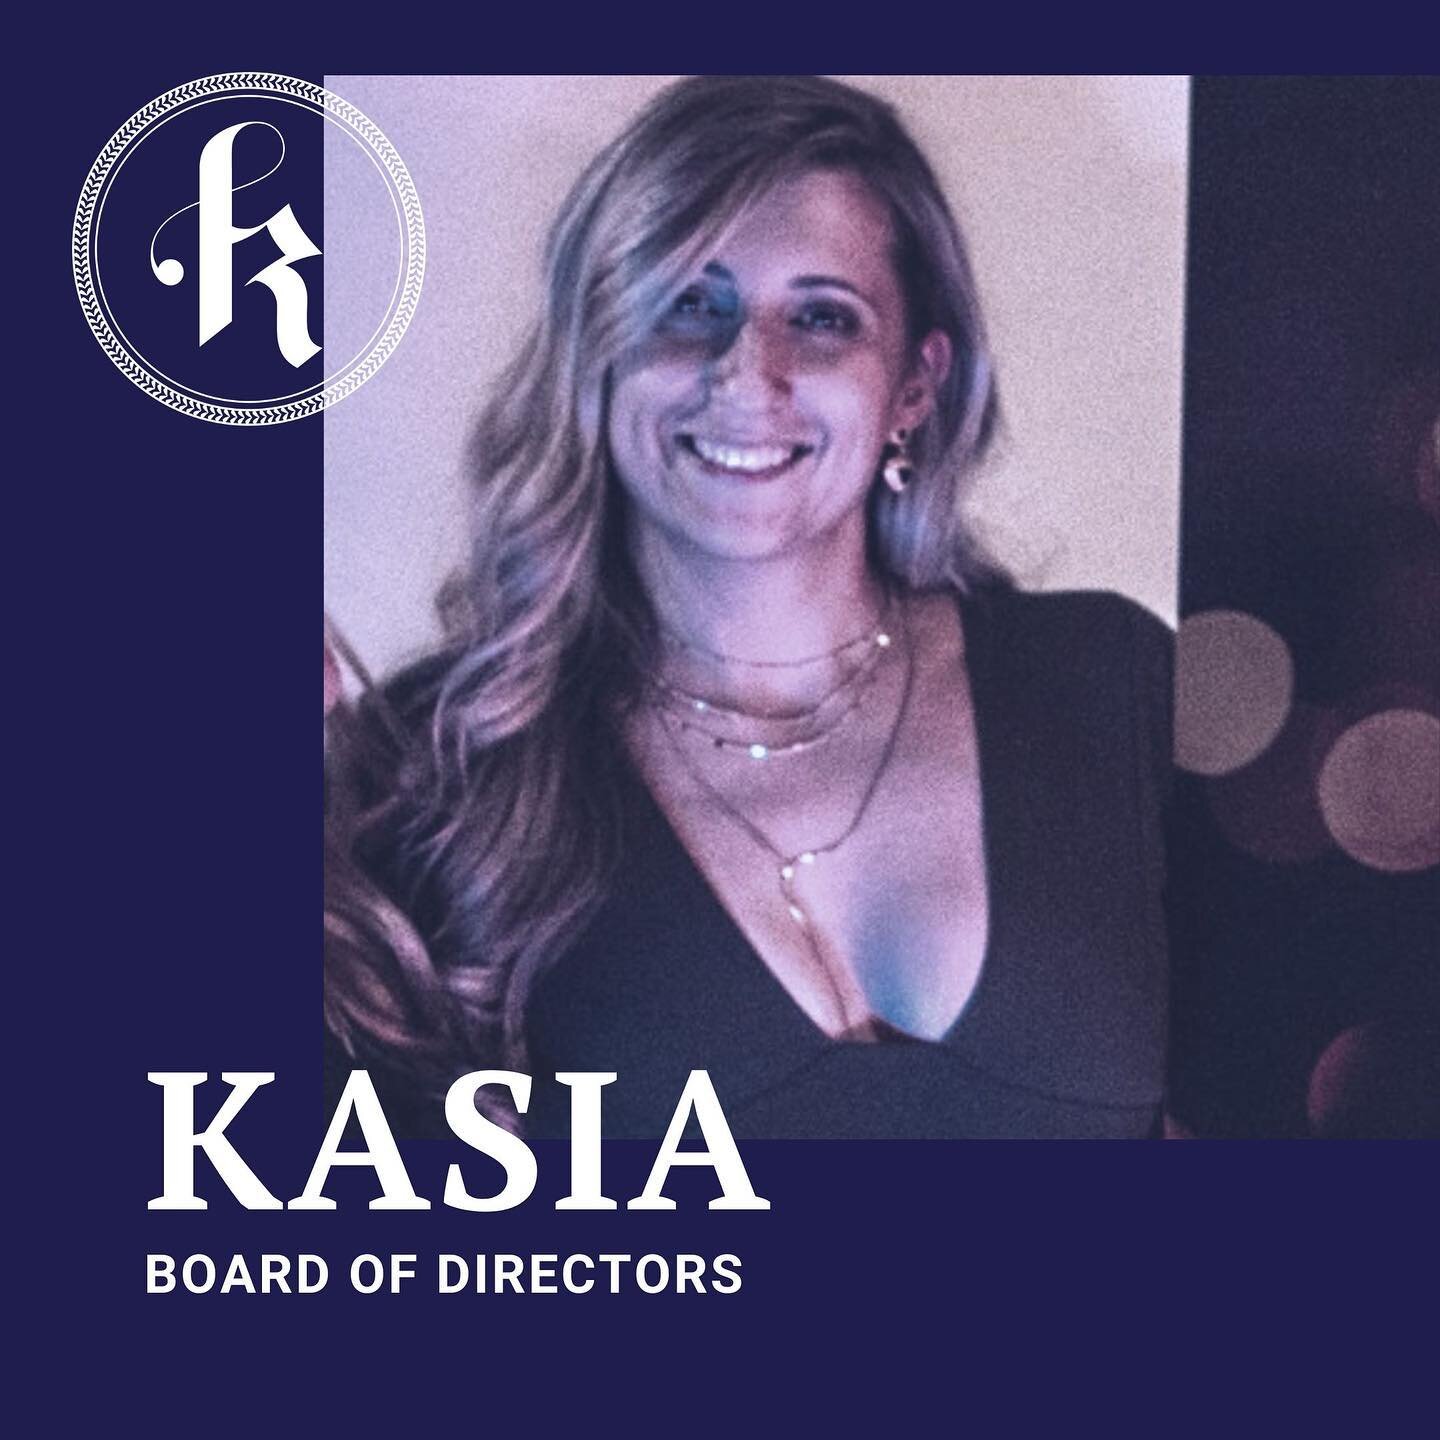 🎉 Happy Birthday to our co-founder, Kasia Kaminska! Kasia is the diplomat and right hand of our organization, always offering a kind ear and speedy resolution in conflict.  Thank you for guiding us with humour &amp; resiliency! Kasia was involved in